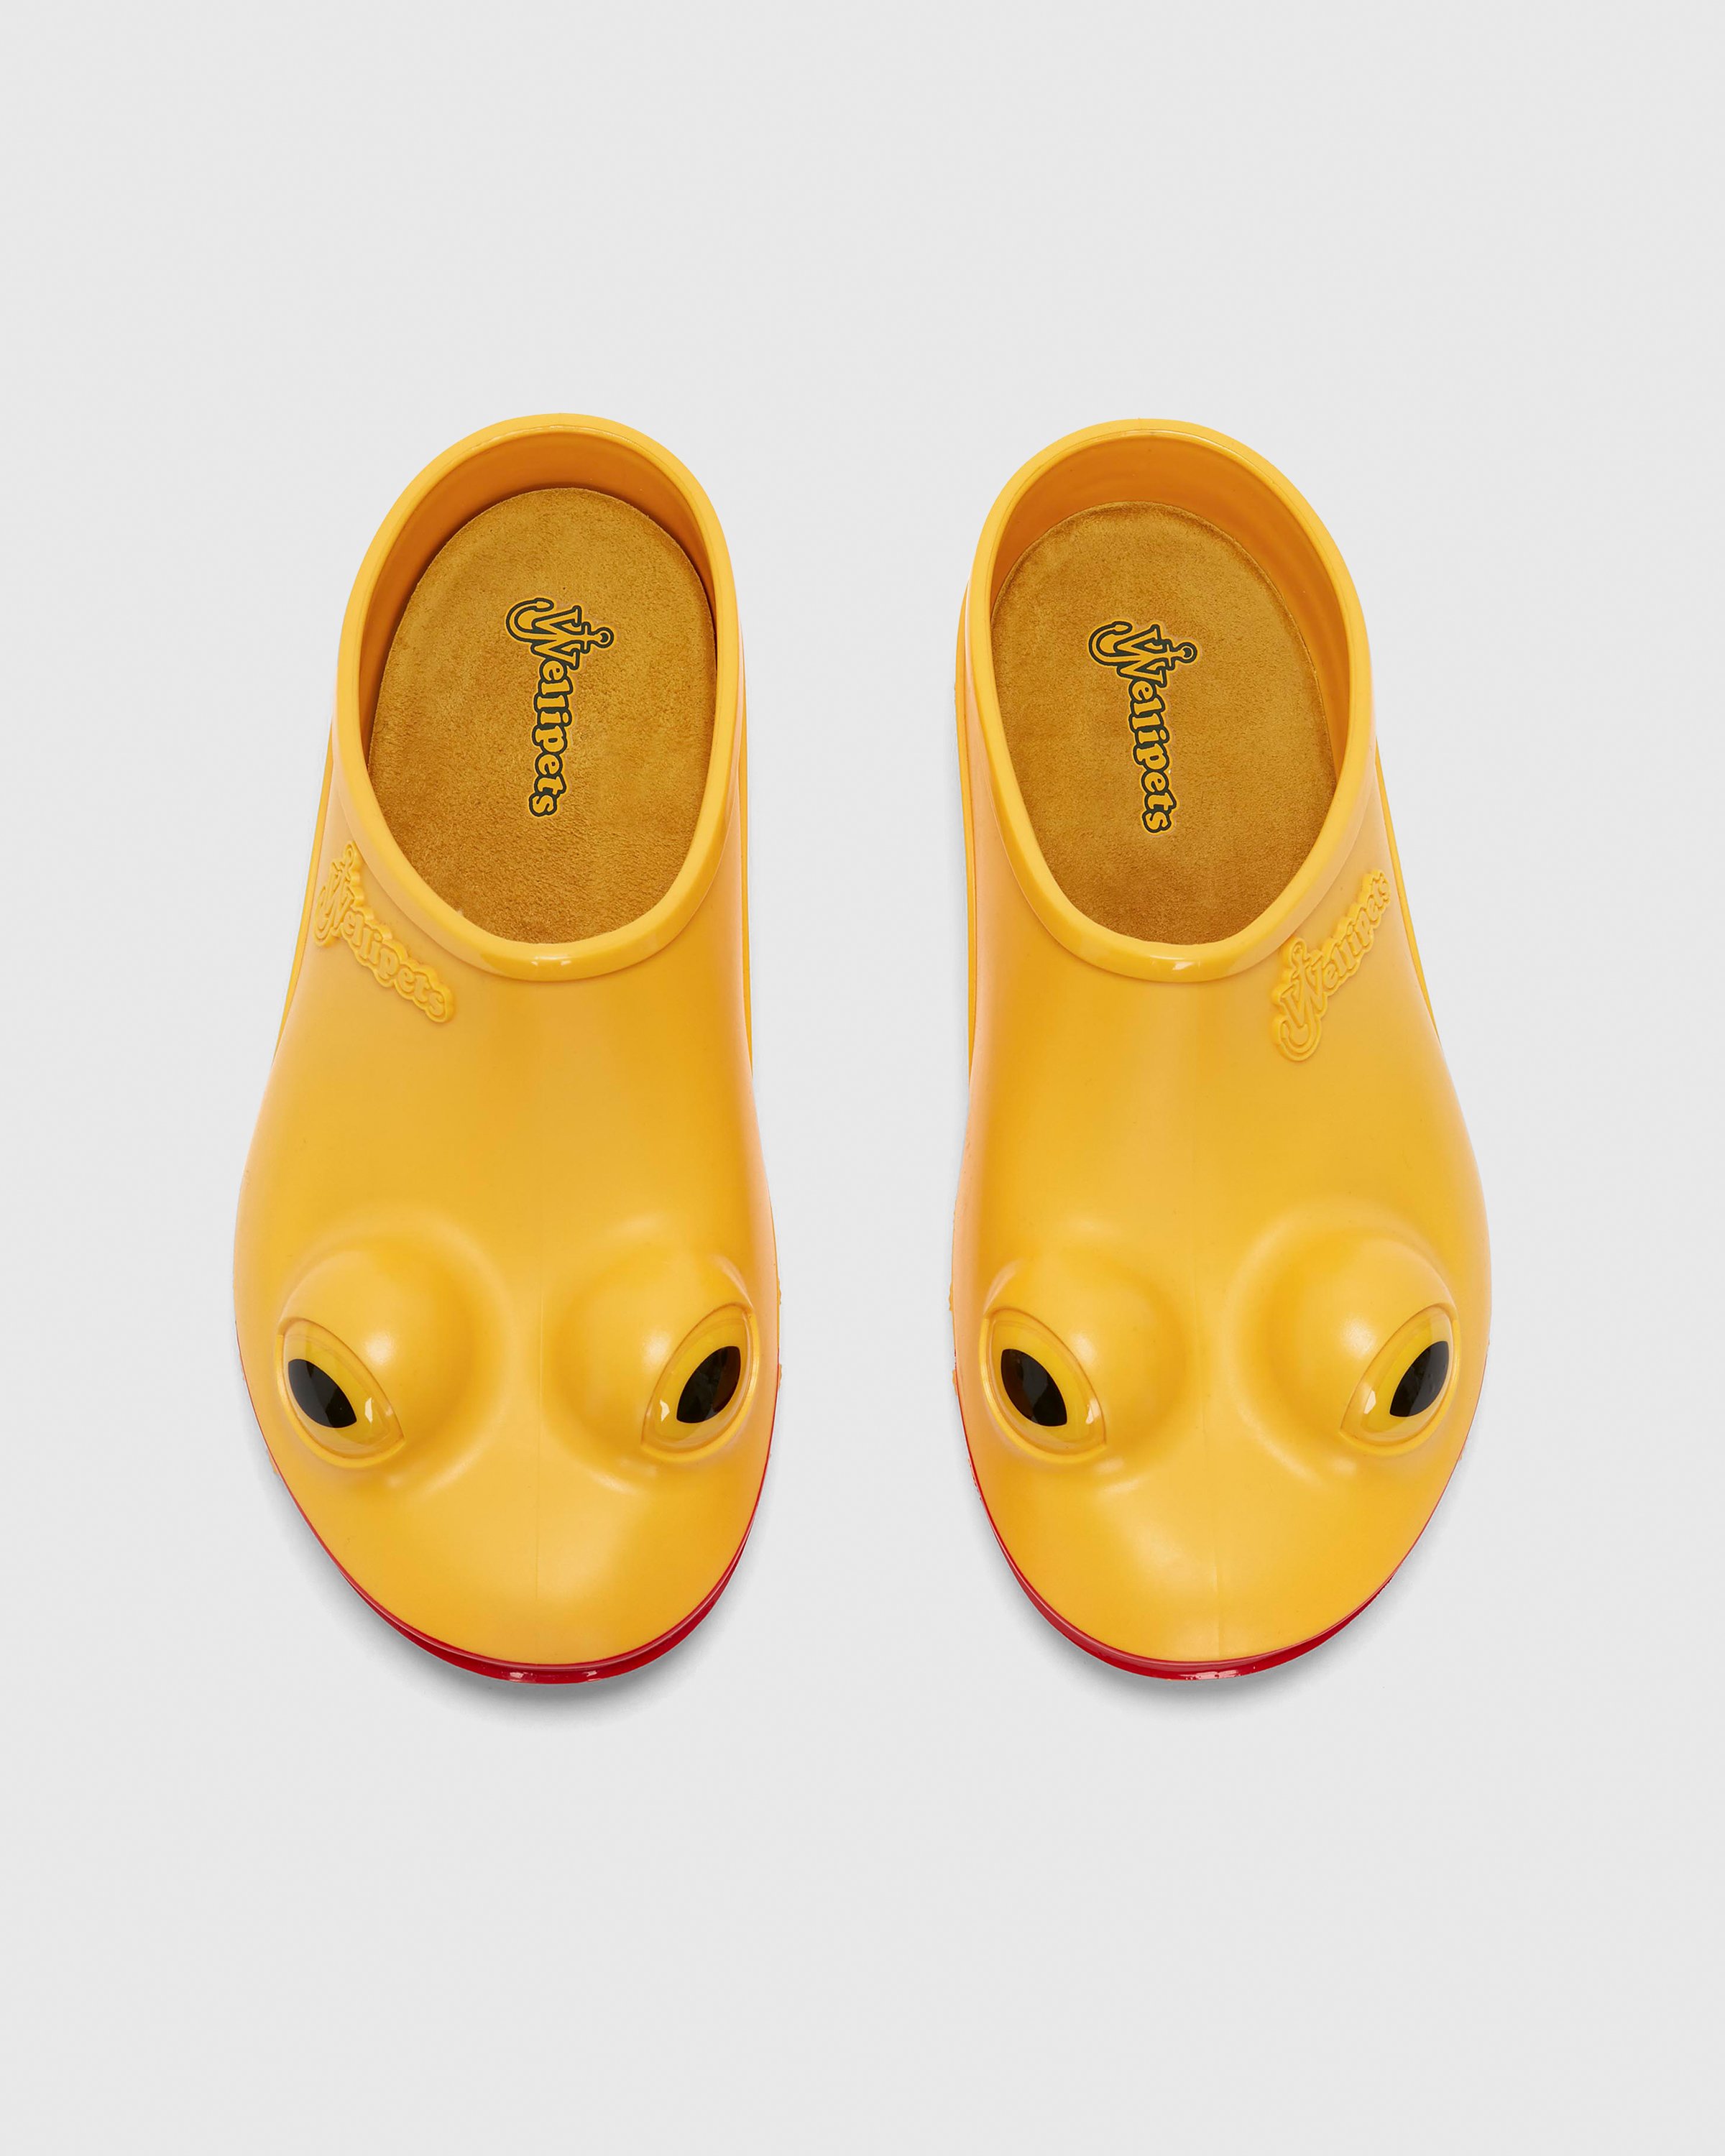 J.W. Anderson x Wellipets - Frog Loafer Yellow - Footwear - Yellow - Image 4